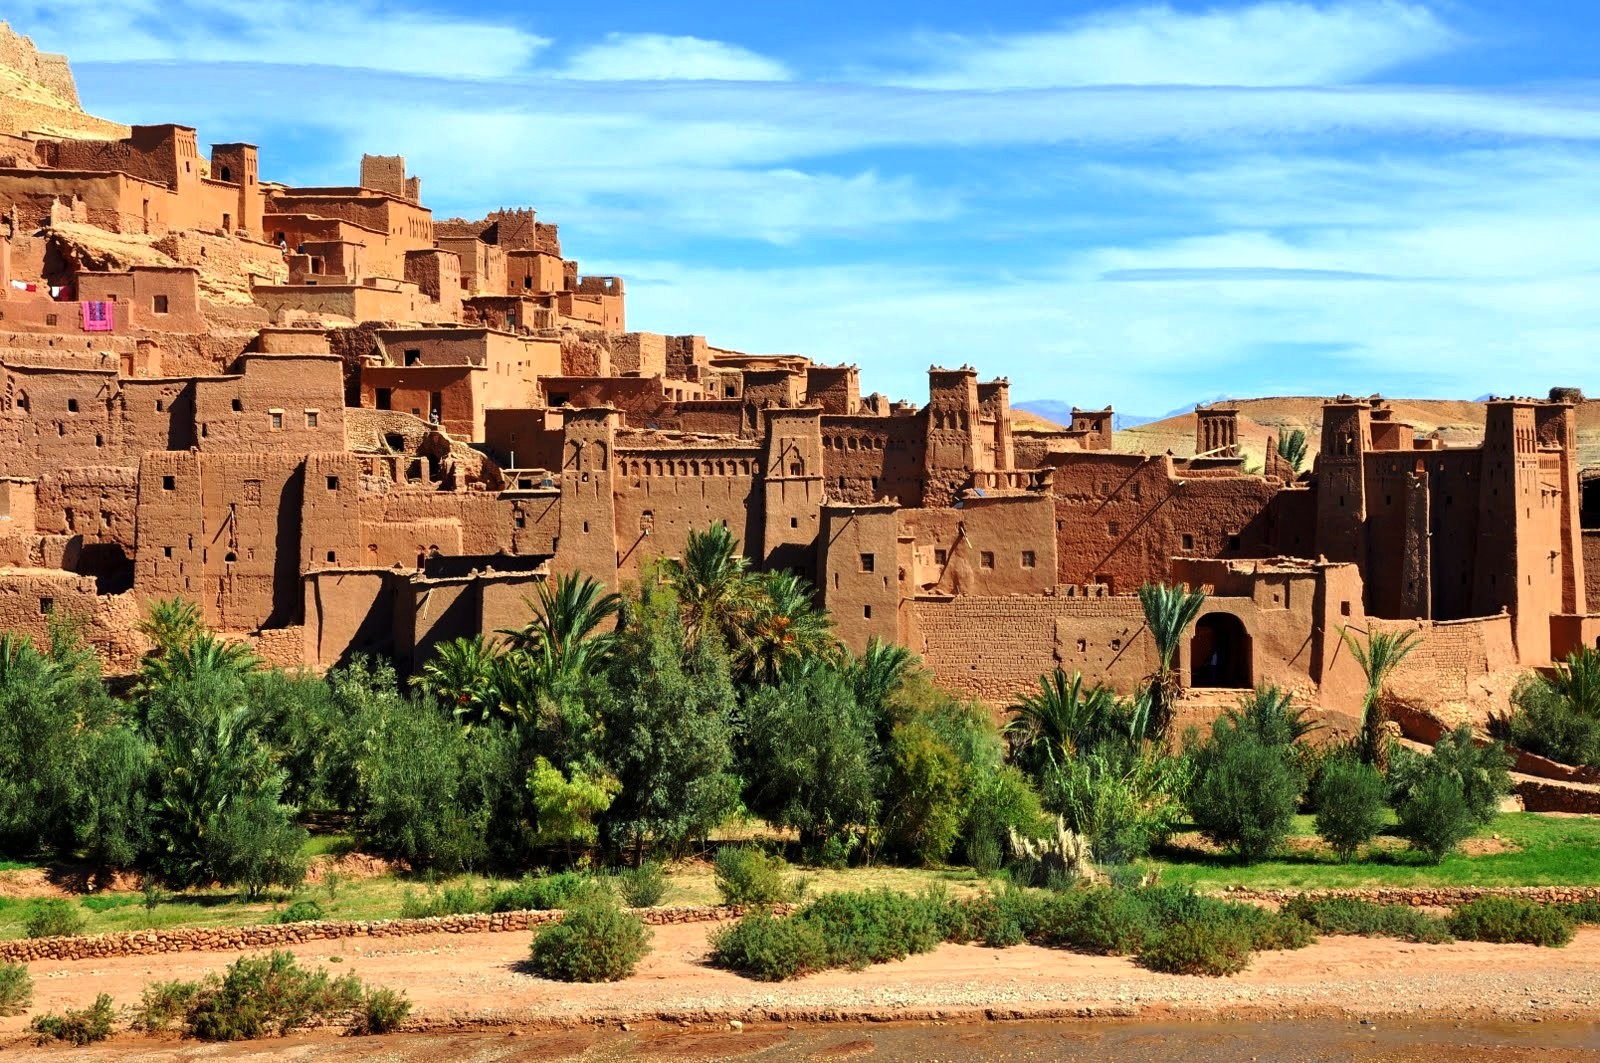 10 days heritage of Morocco tailor-made tour from Casablanca to discover Imperial cities and Sahara Desert of Morocco